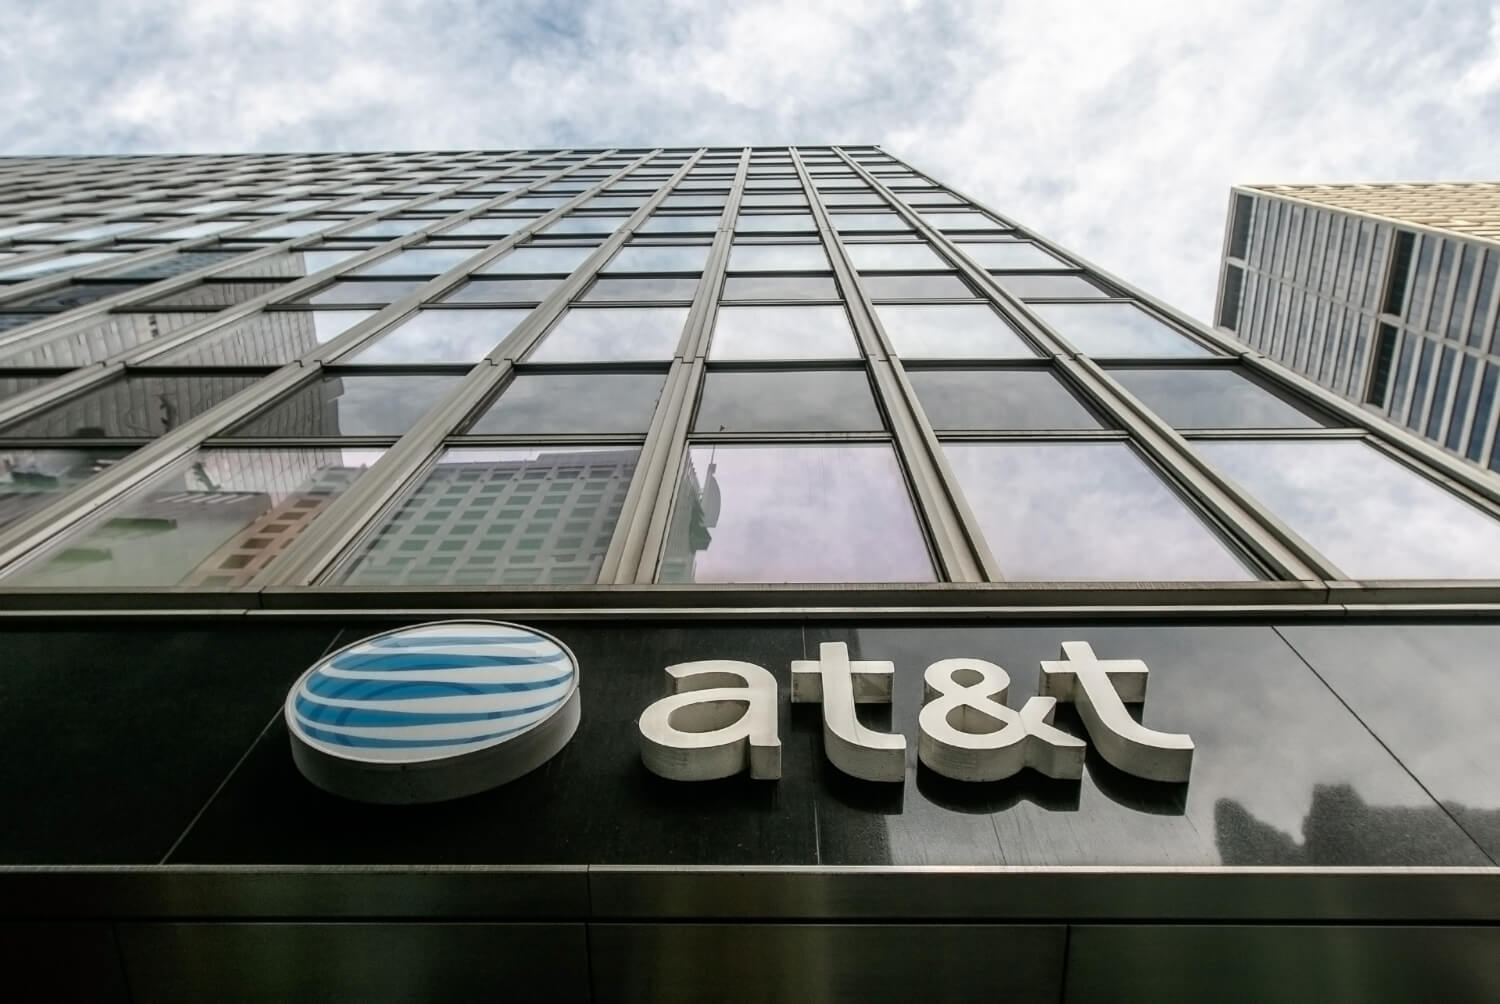 AT&T is slashing a 'sizable' number of jobs and closing 250 retail stores